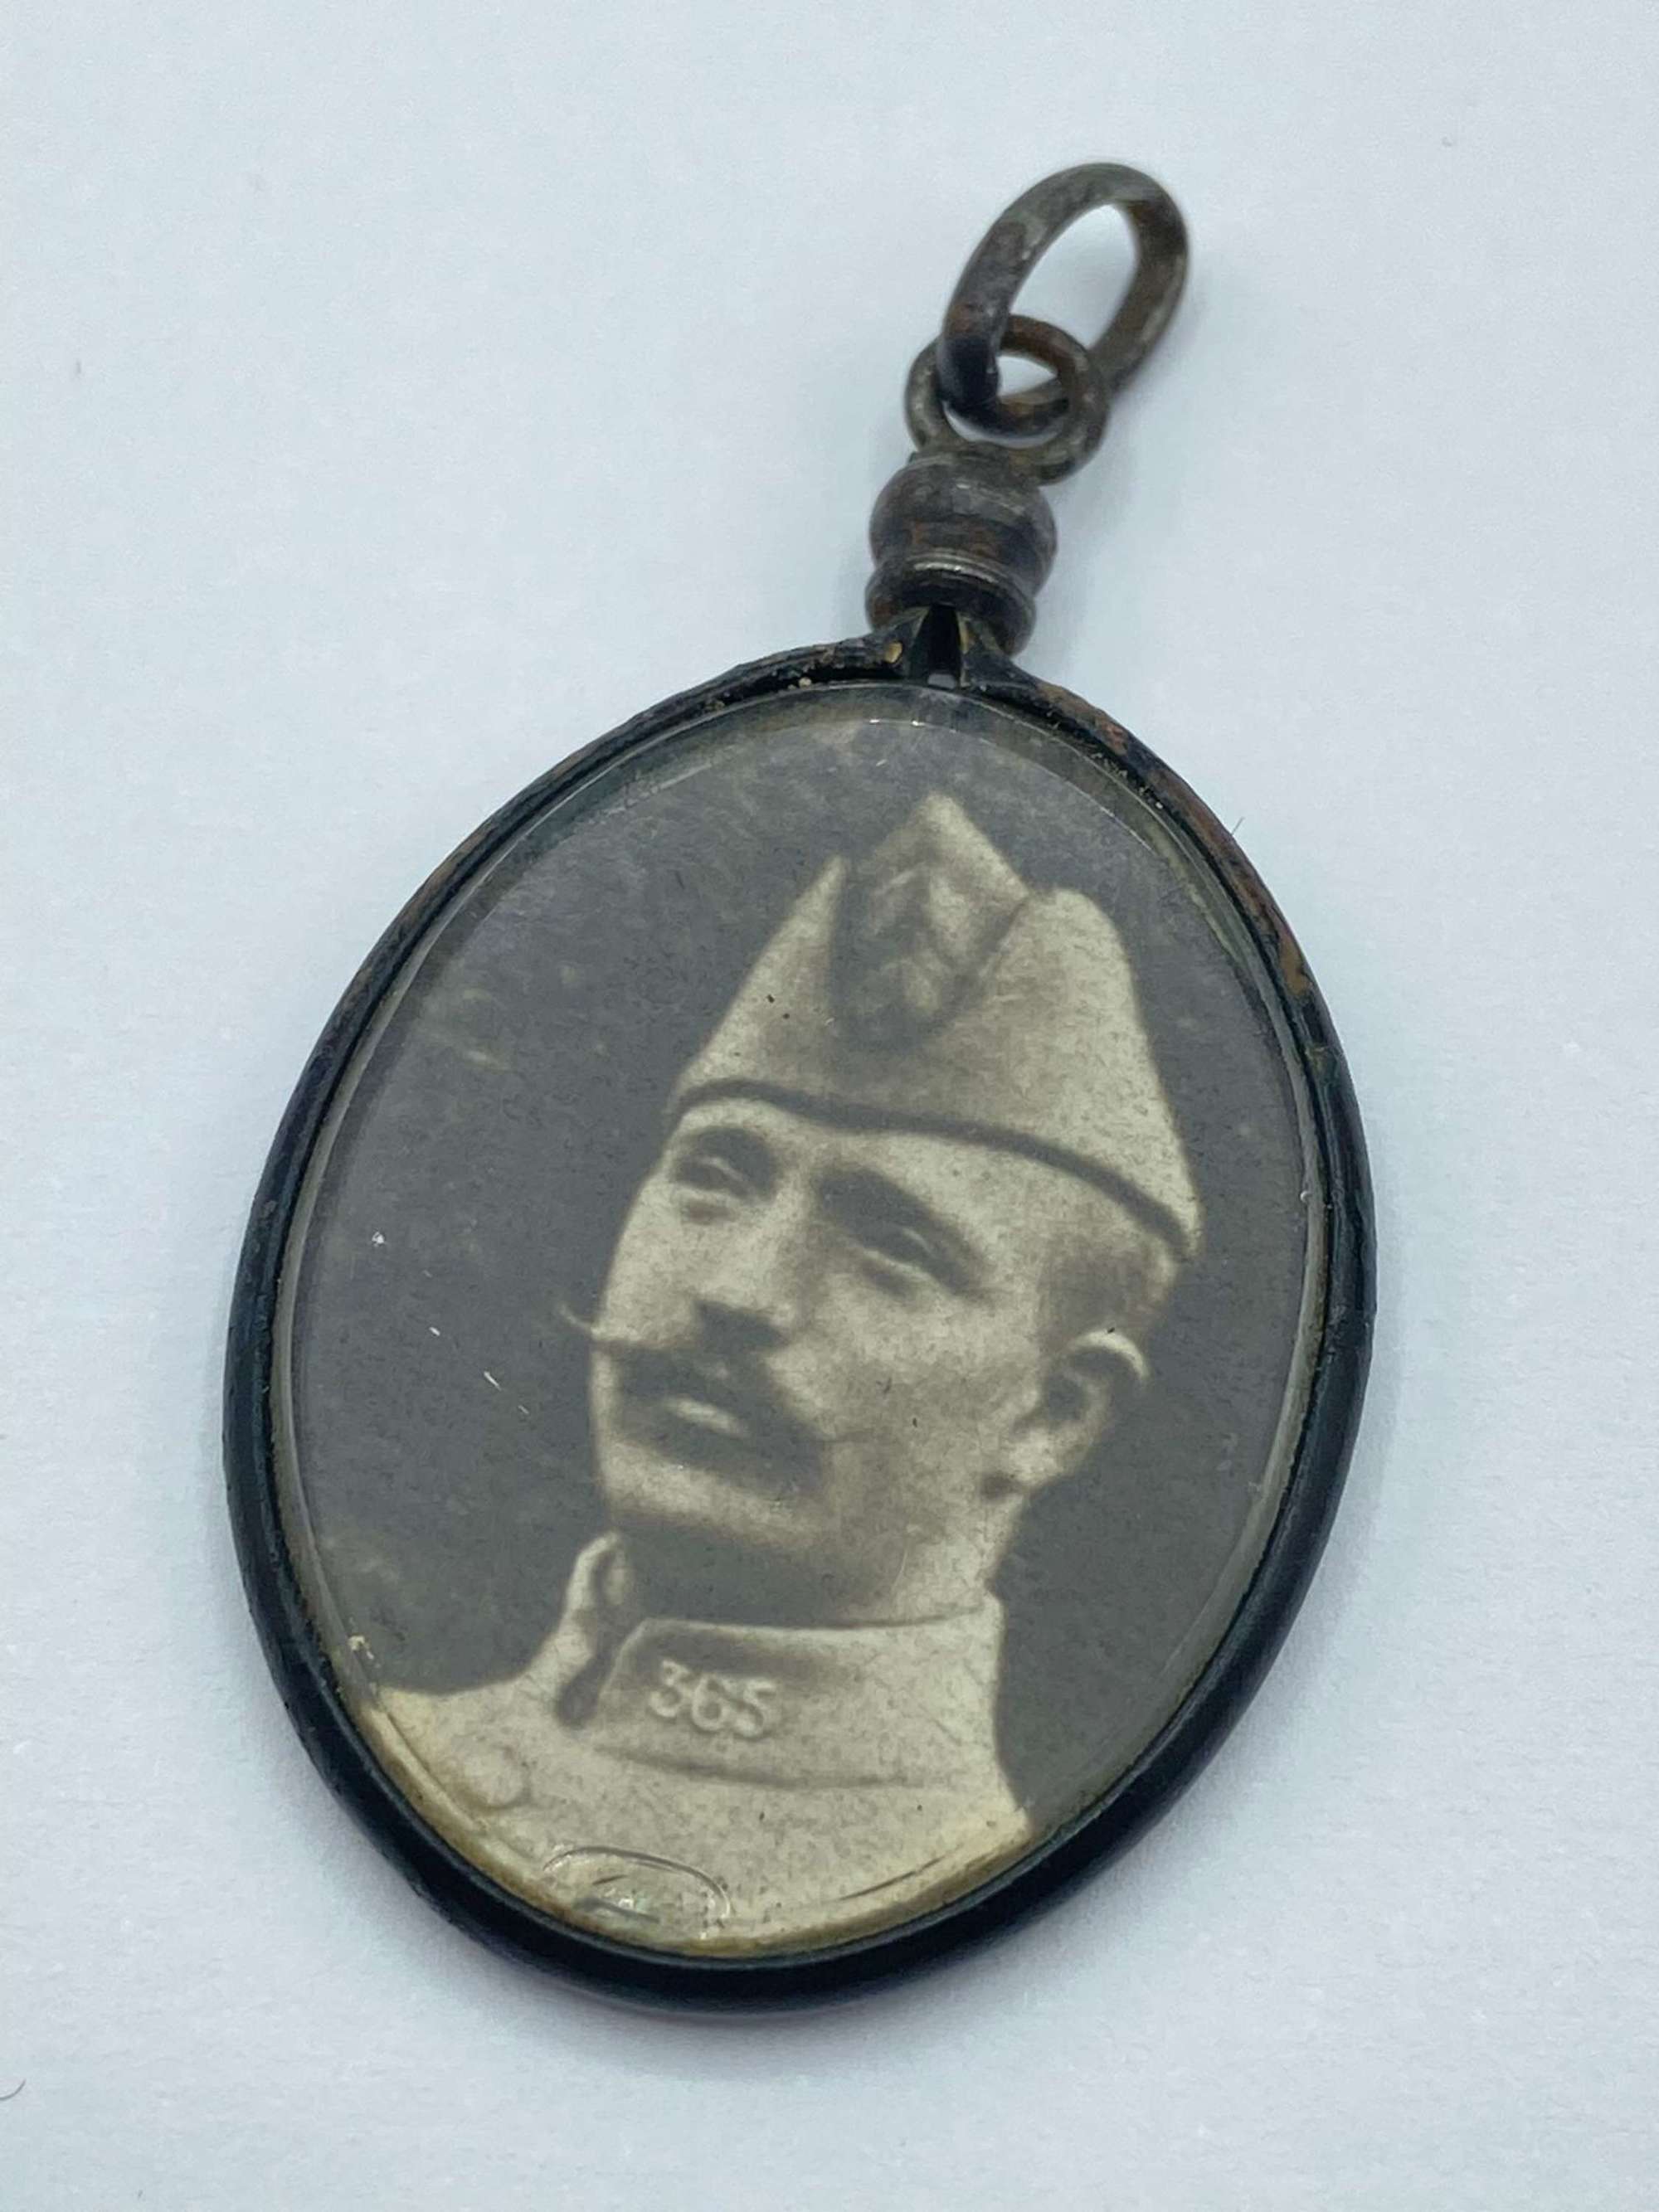 WW1 French Double Sided Locket Of A Lieutenant 365th Infantry Regiment